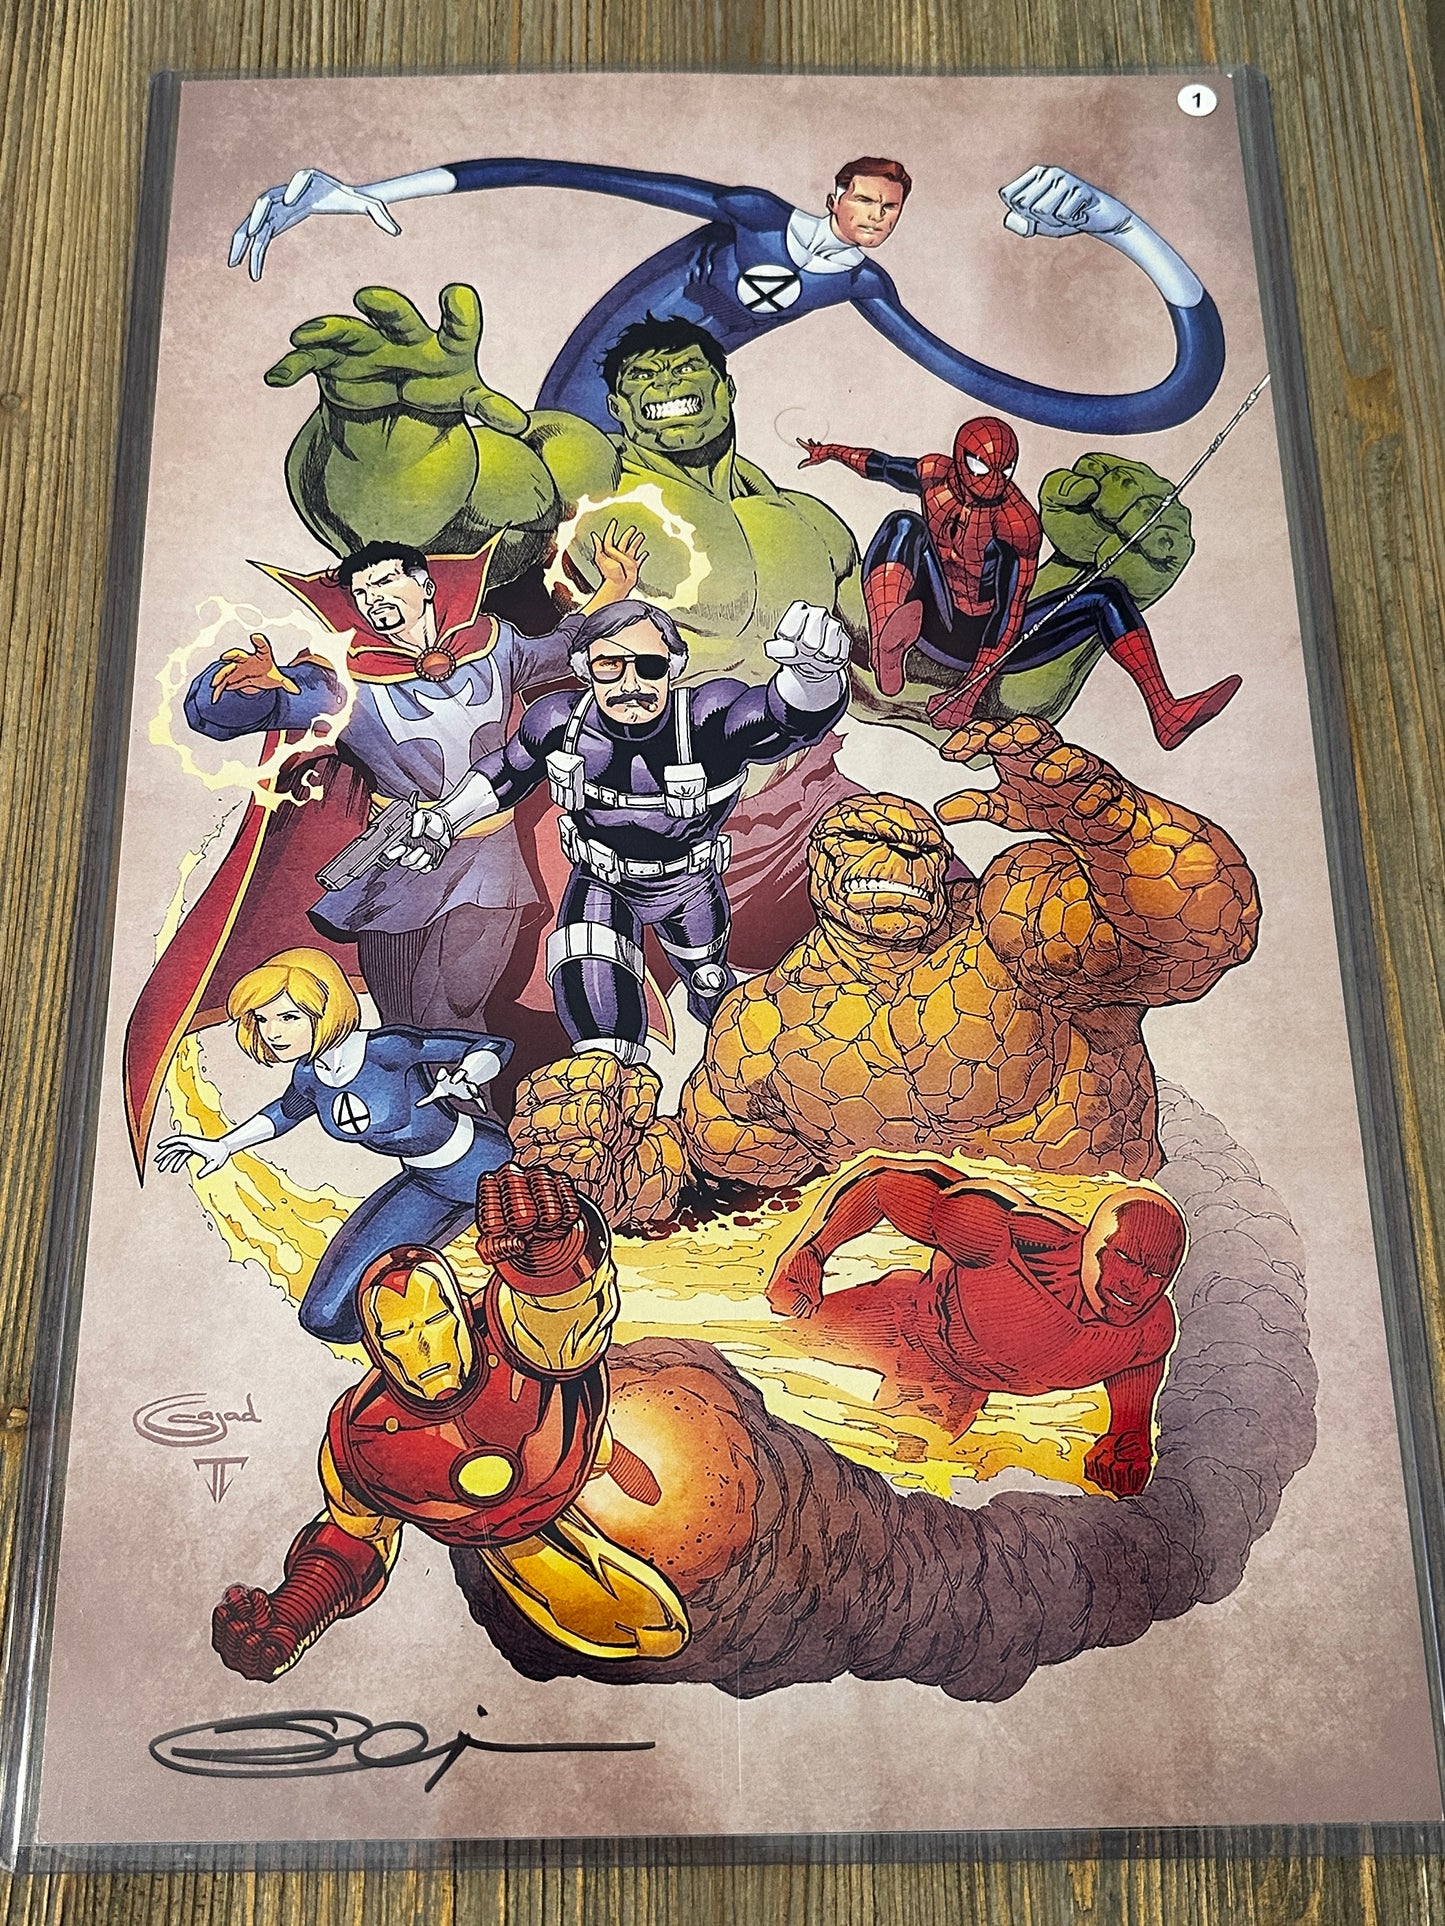 11x17 signed print Avengers tribute to Stan Lee